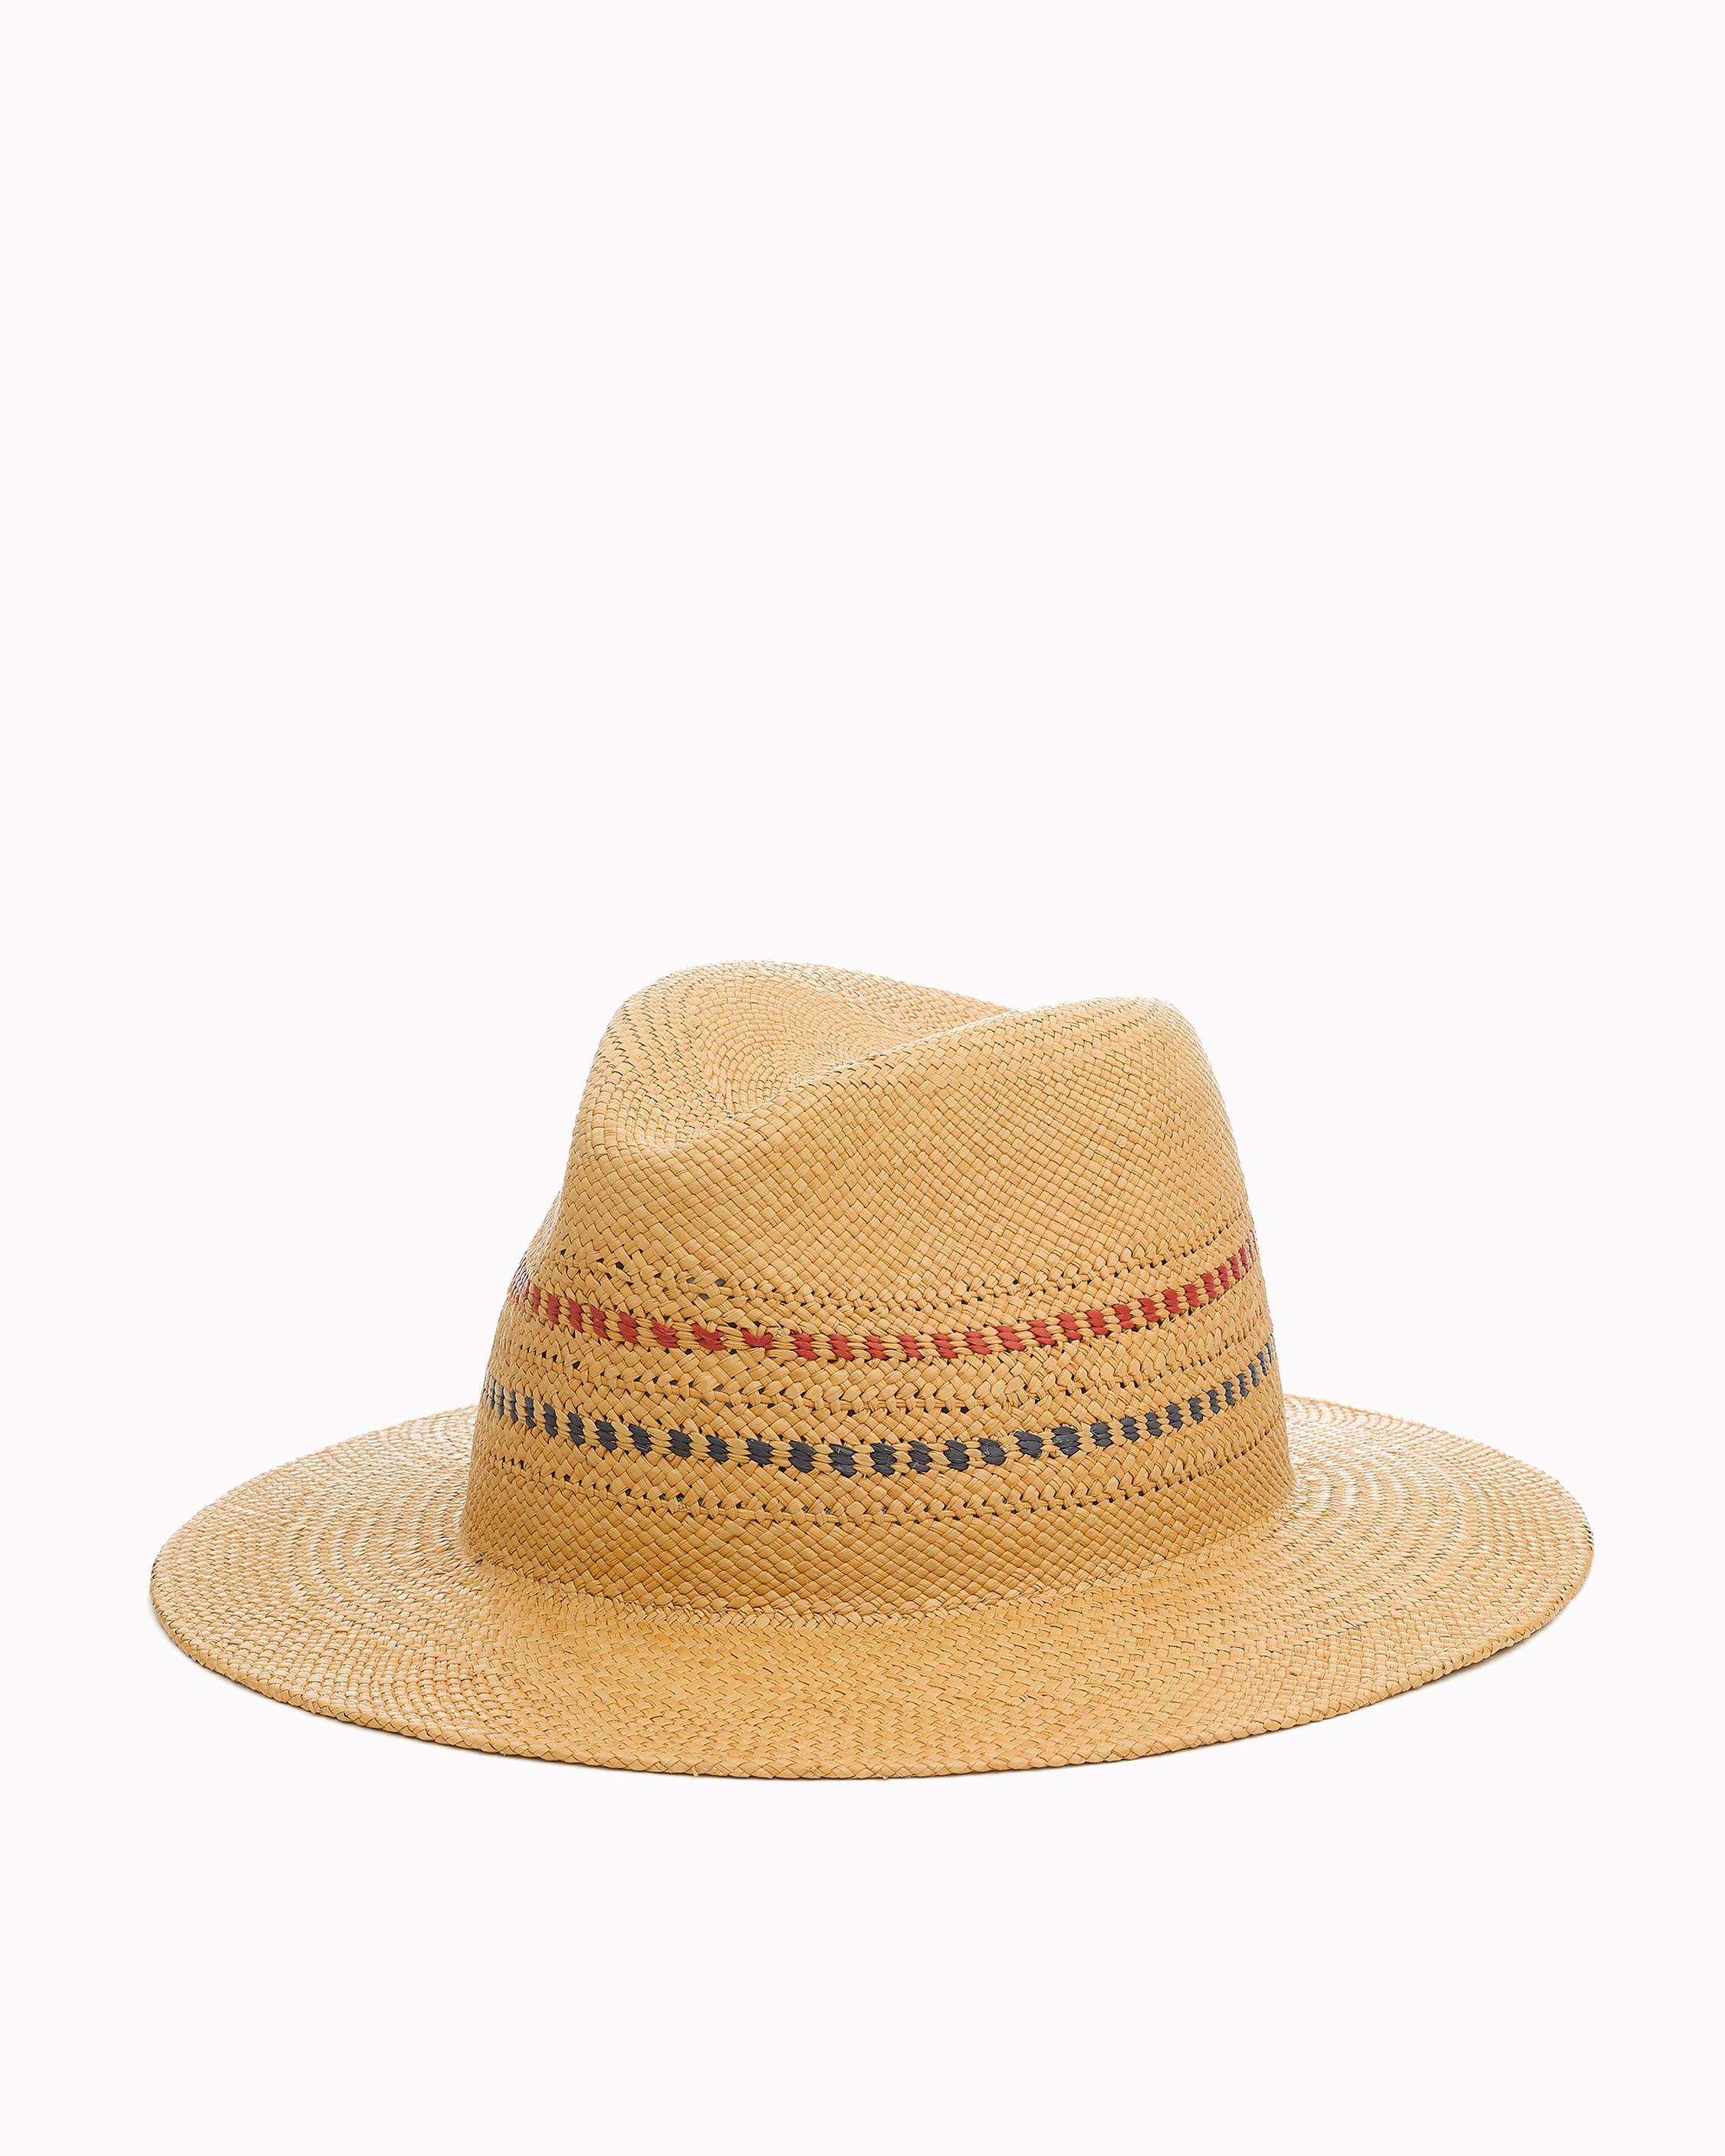 Accessories: Fedoras to Sunglasses to Scarves with Urban Style | rag & bone